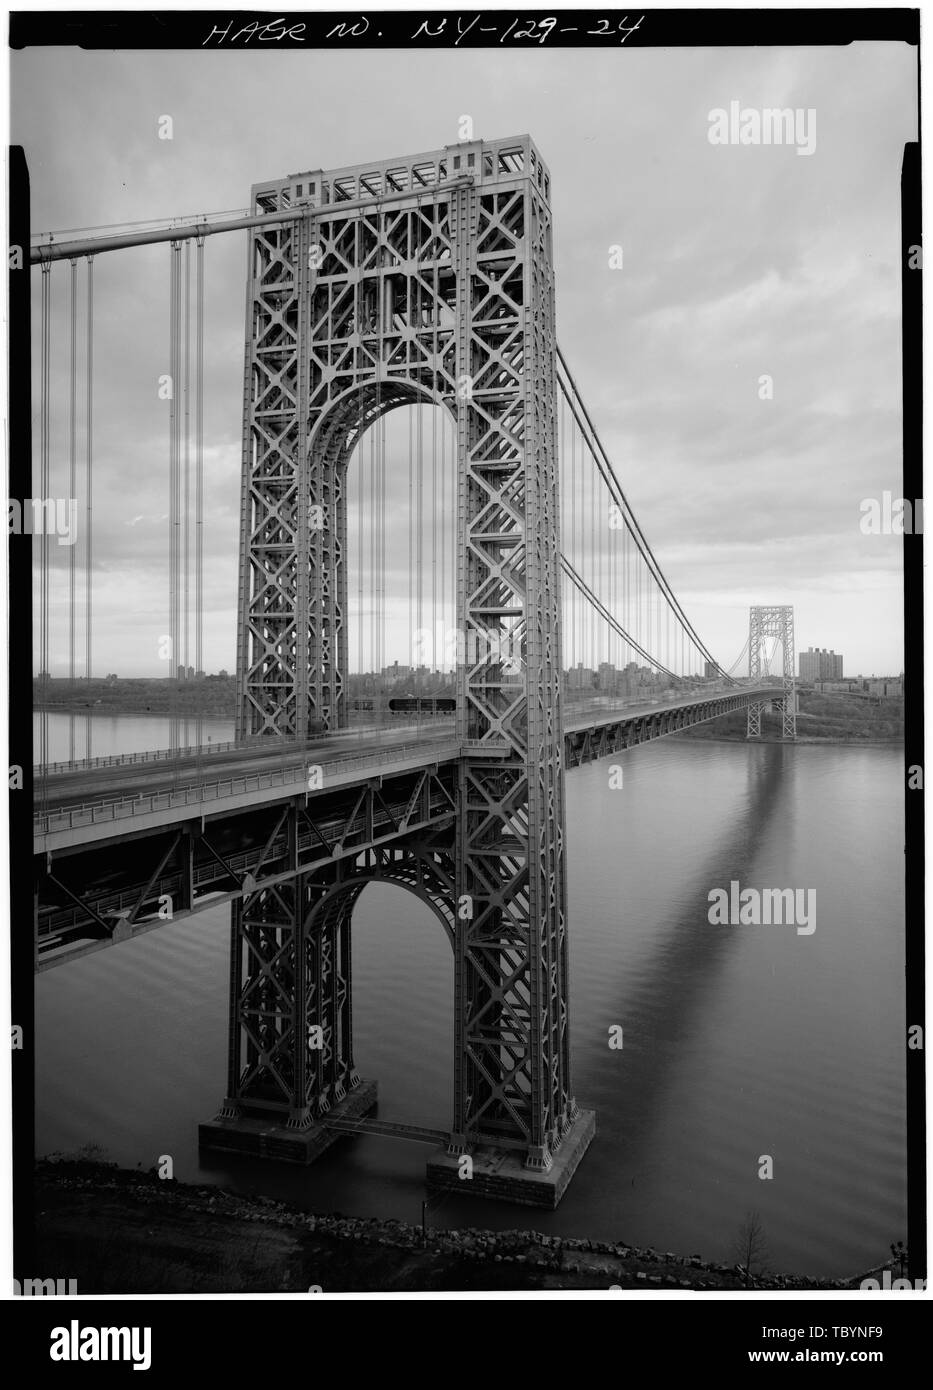 NEW JERSEY TOWER, LOOKING EAST  George Washington Bridge, Spanning Hudson River between Manhattan and Fort Lee, NJ, New York, New York County, NY Stock Photo